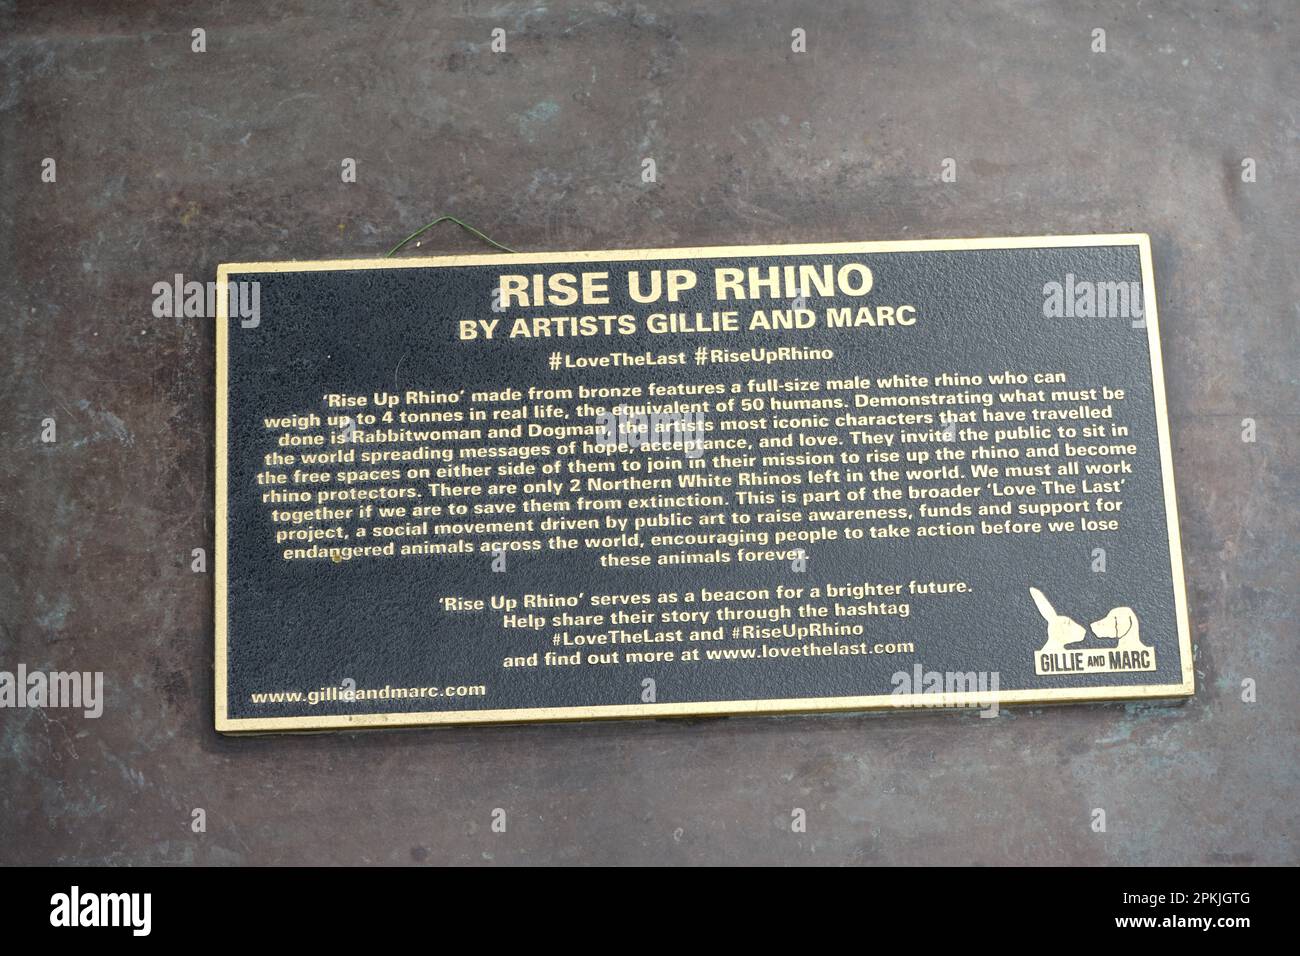 An information board for “Rise Up Rhino,” a bronze sculpture by artists Gillie & Marc at Westfield Shopping Centre in White City, west London. Stock Photo